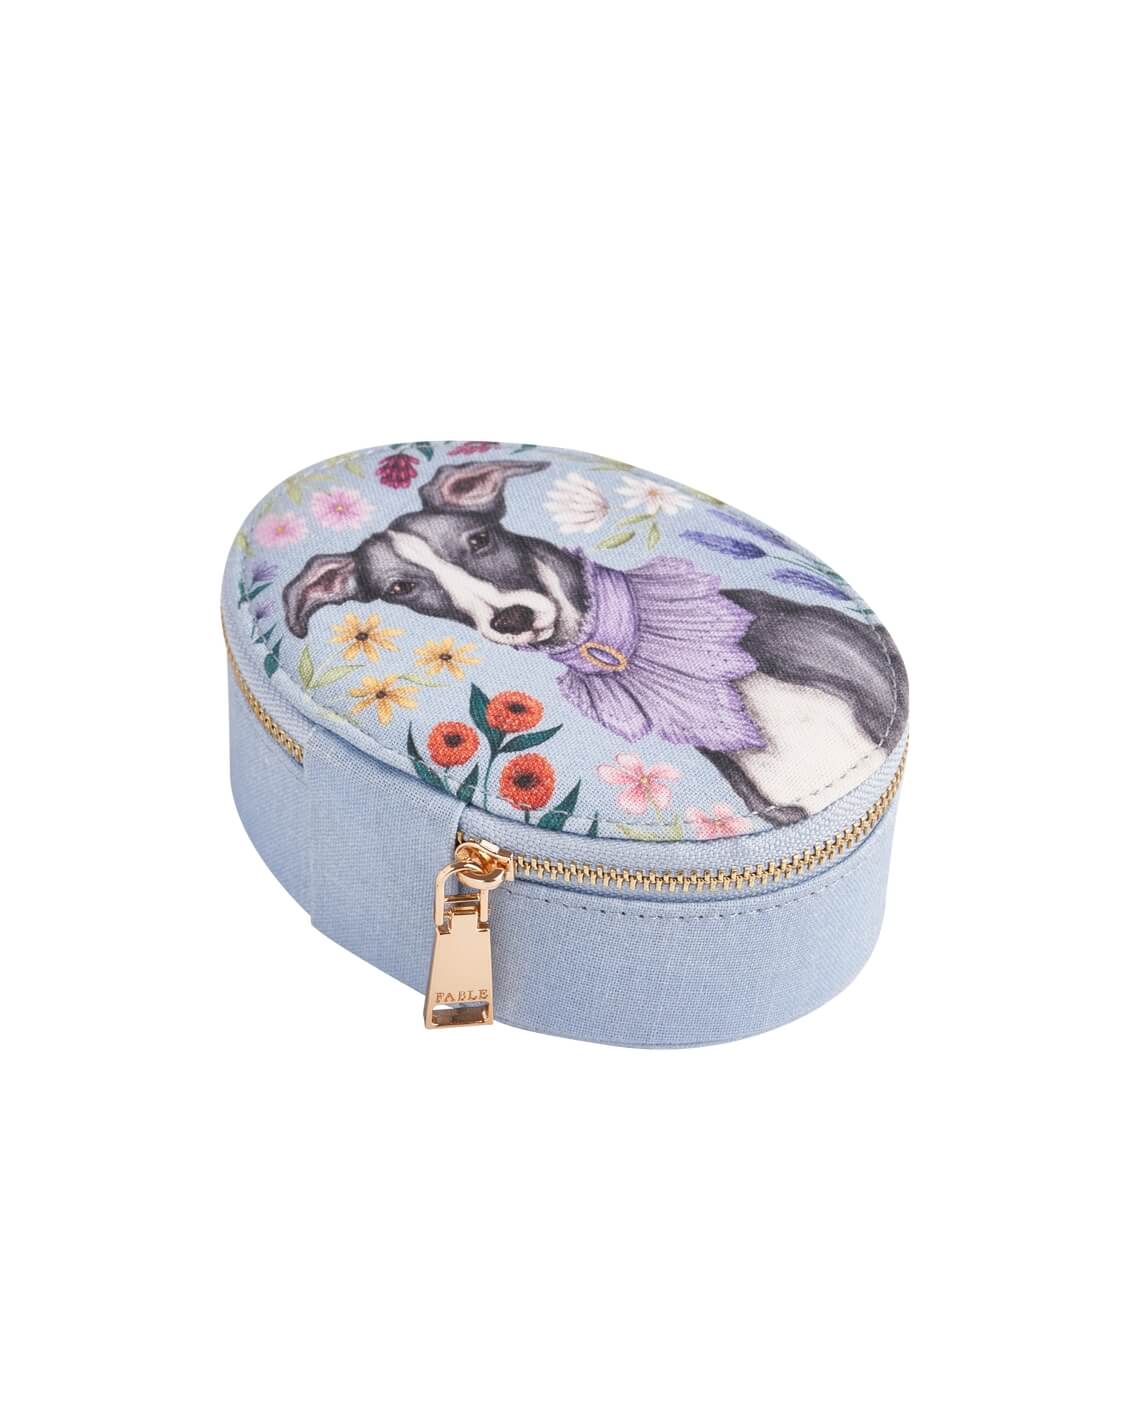 Fable Whippet Oval Jewelry Box